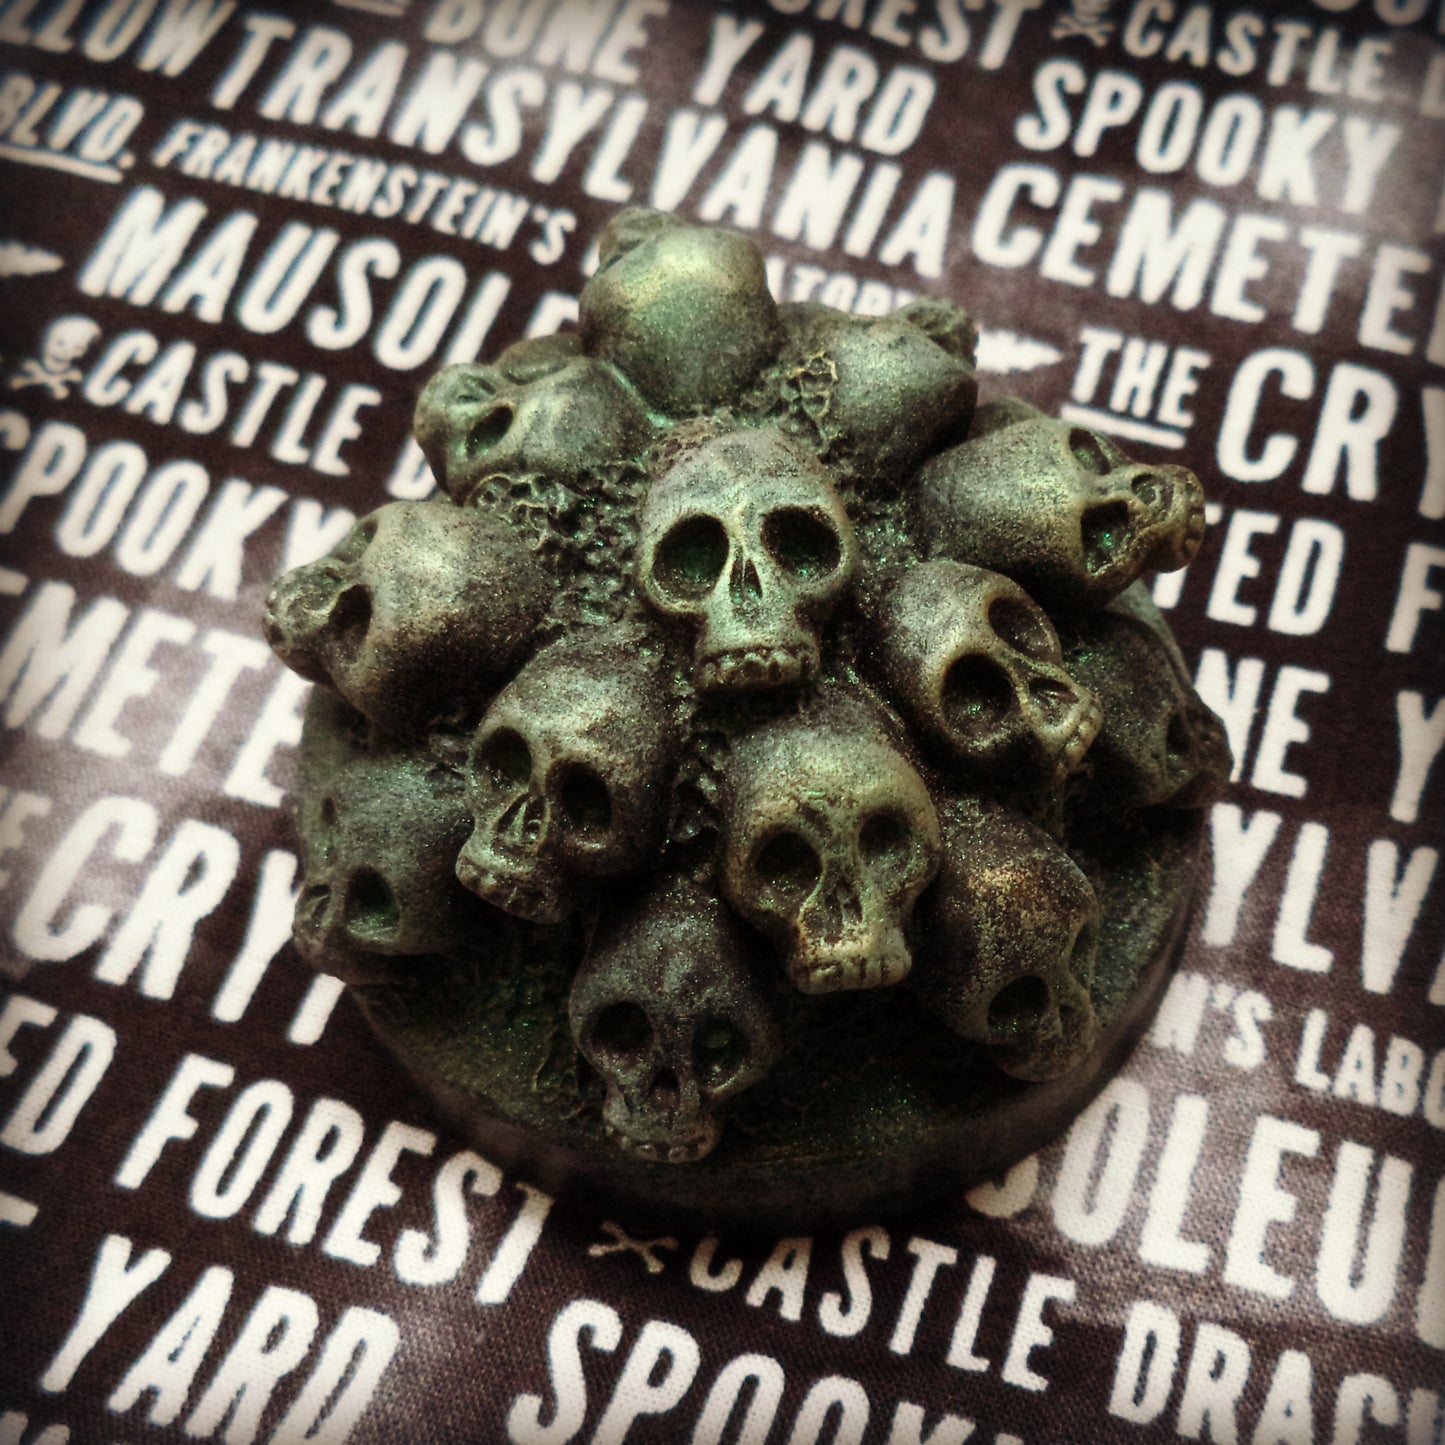 A Catacomb soap: many small skulls, tinted a pearly green. It is sitting on Halloween fabric printed with the names of spooky places.